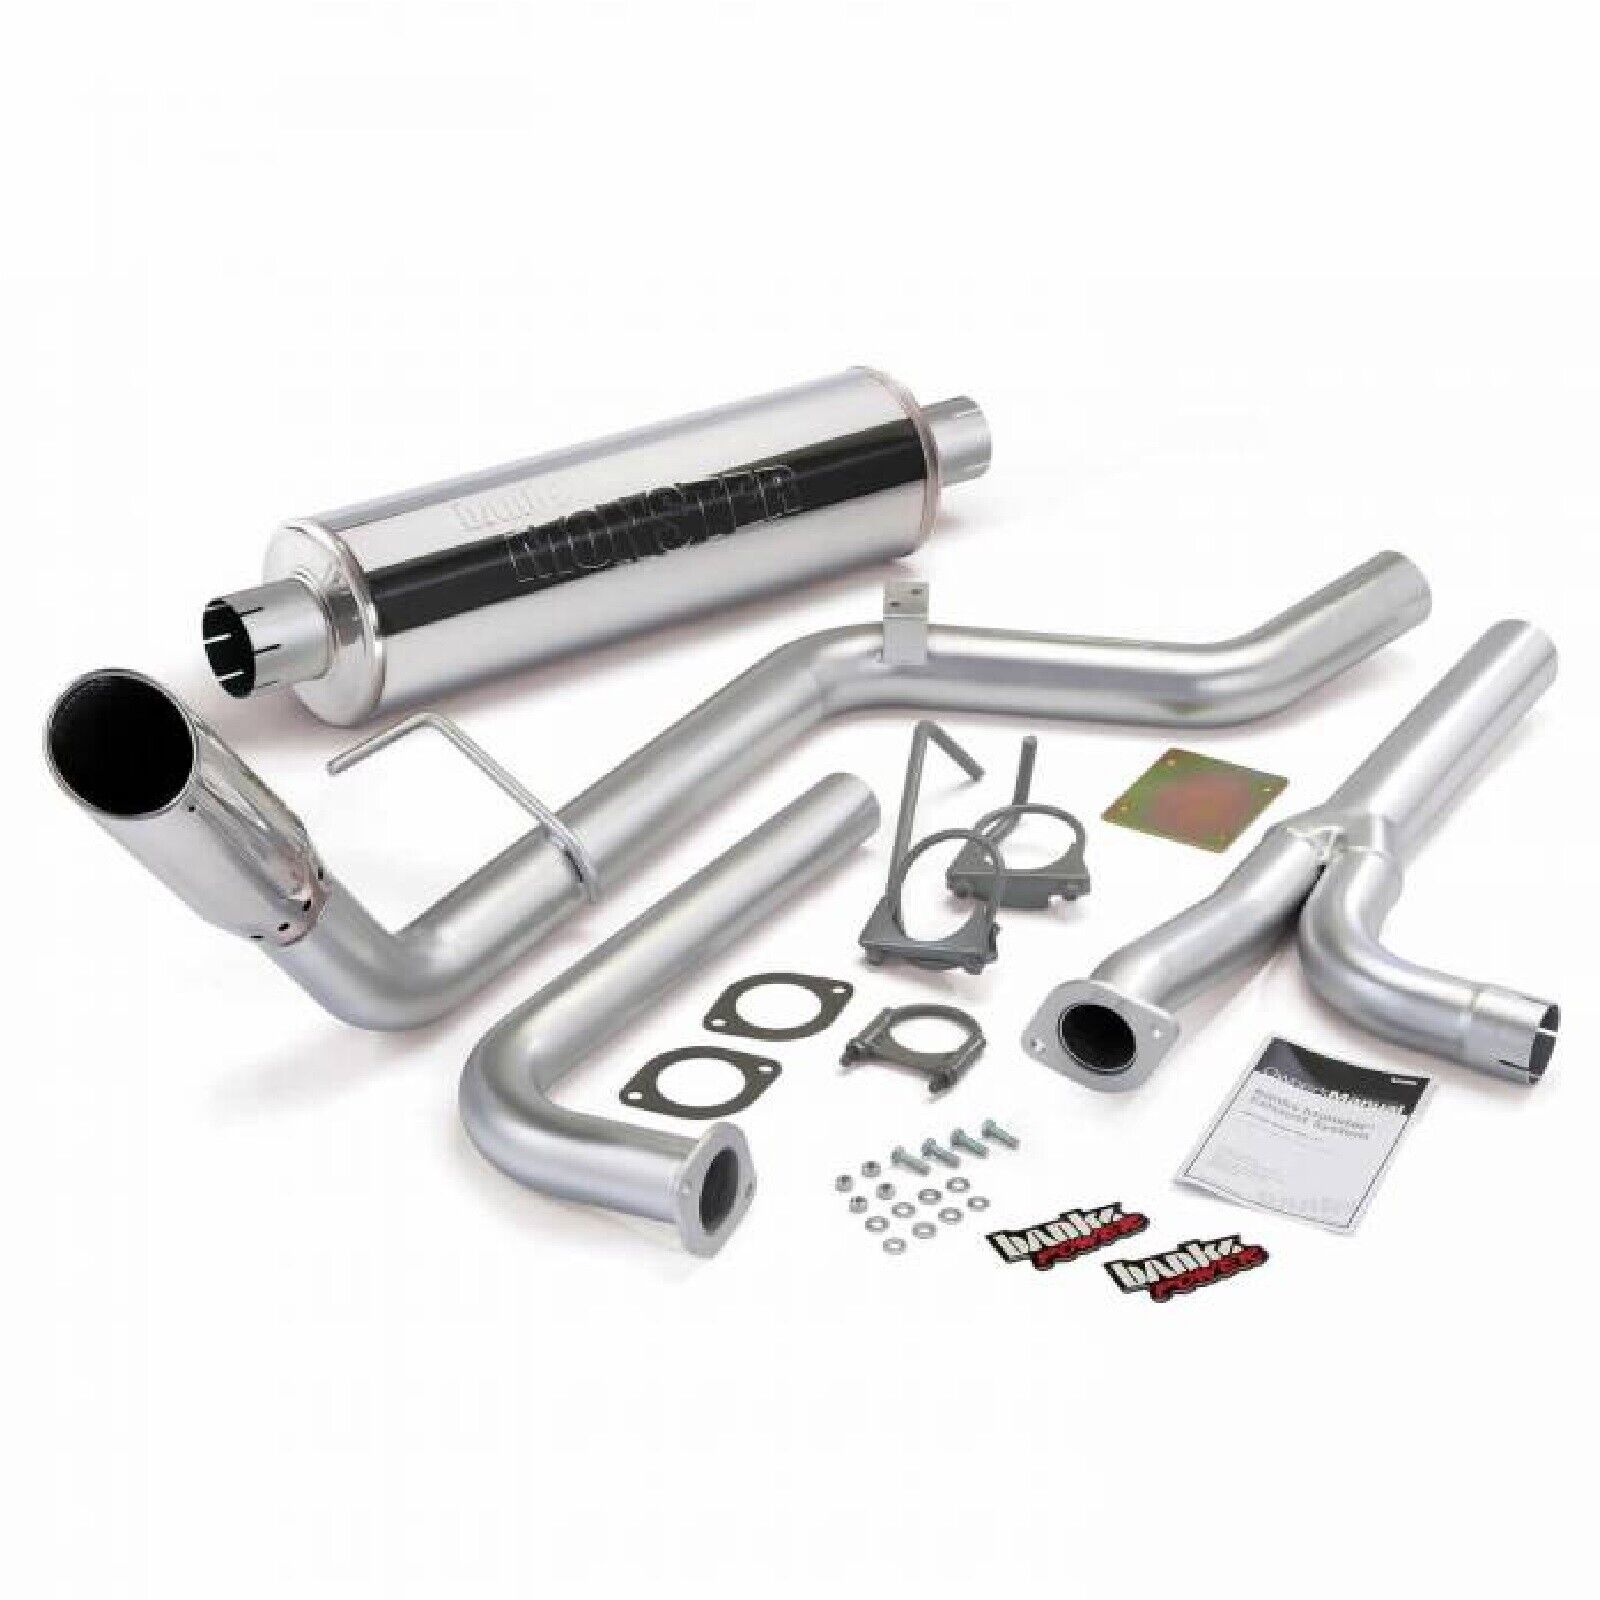 Banks 48125 Chrome Tip Monster Exhaust for Nissan Frontier 4.0L